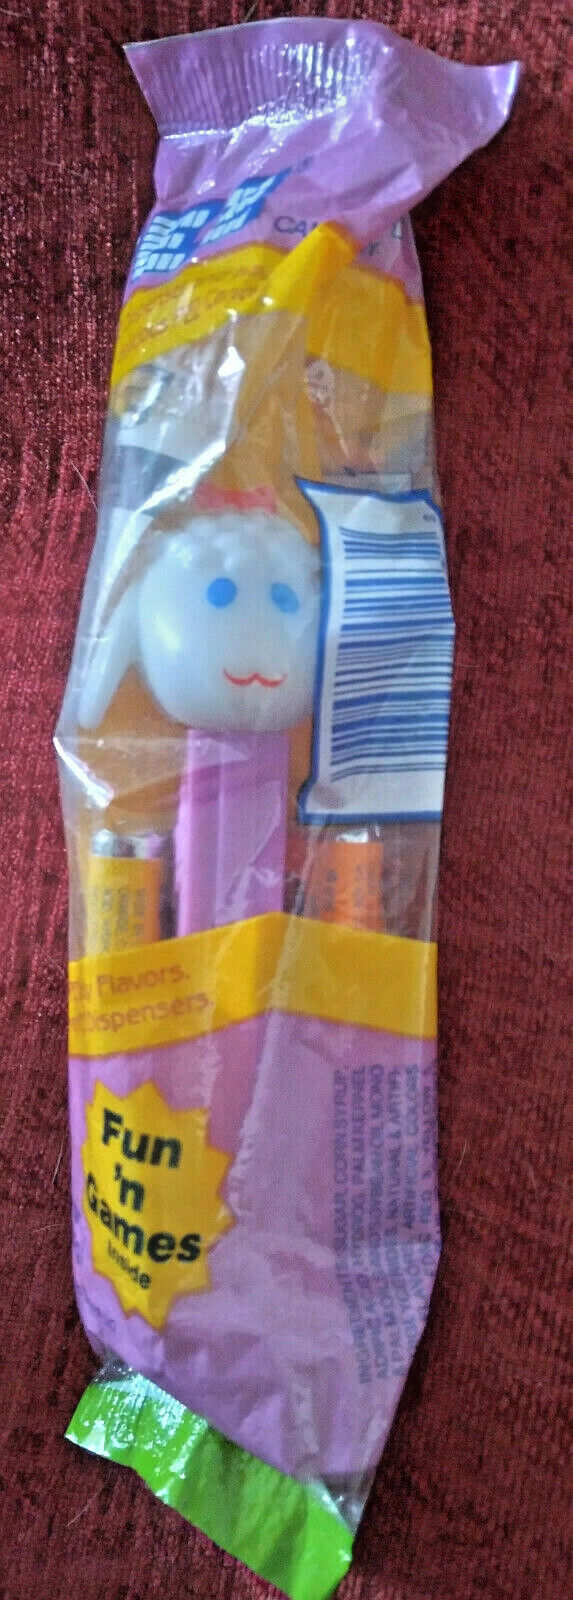 Lamb Chop Footed Pez Dispenser + Candy New Sealed Fun Games Lemon Orange Footed